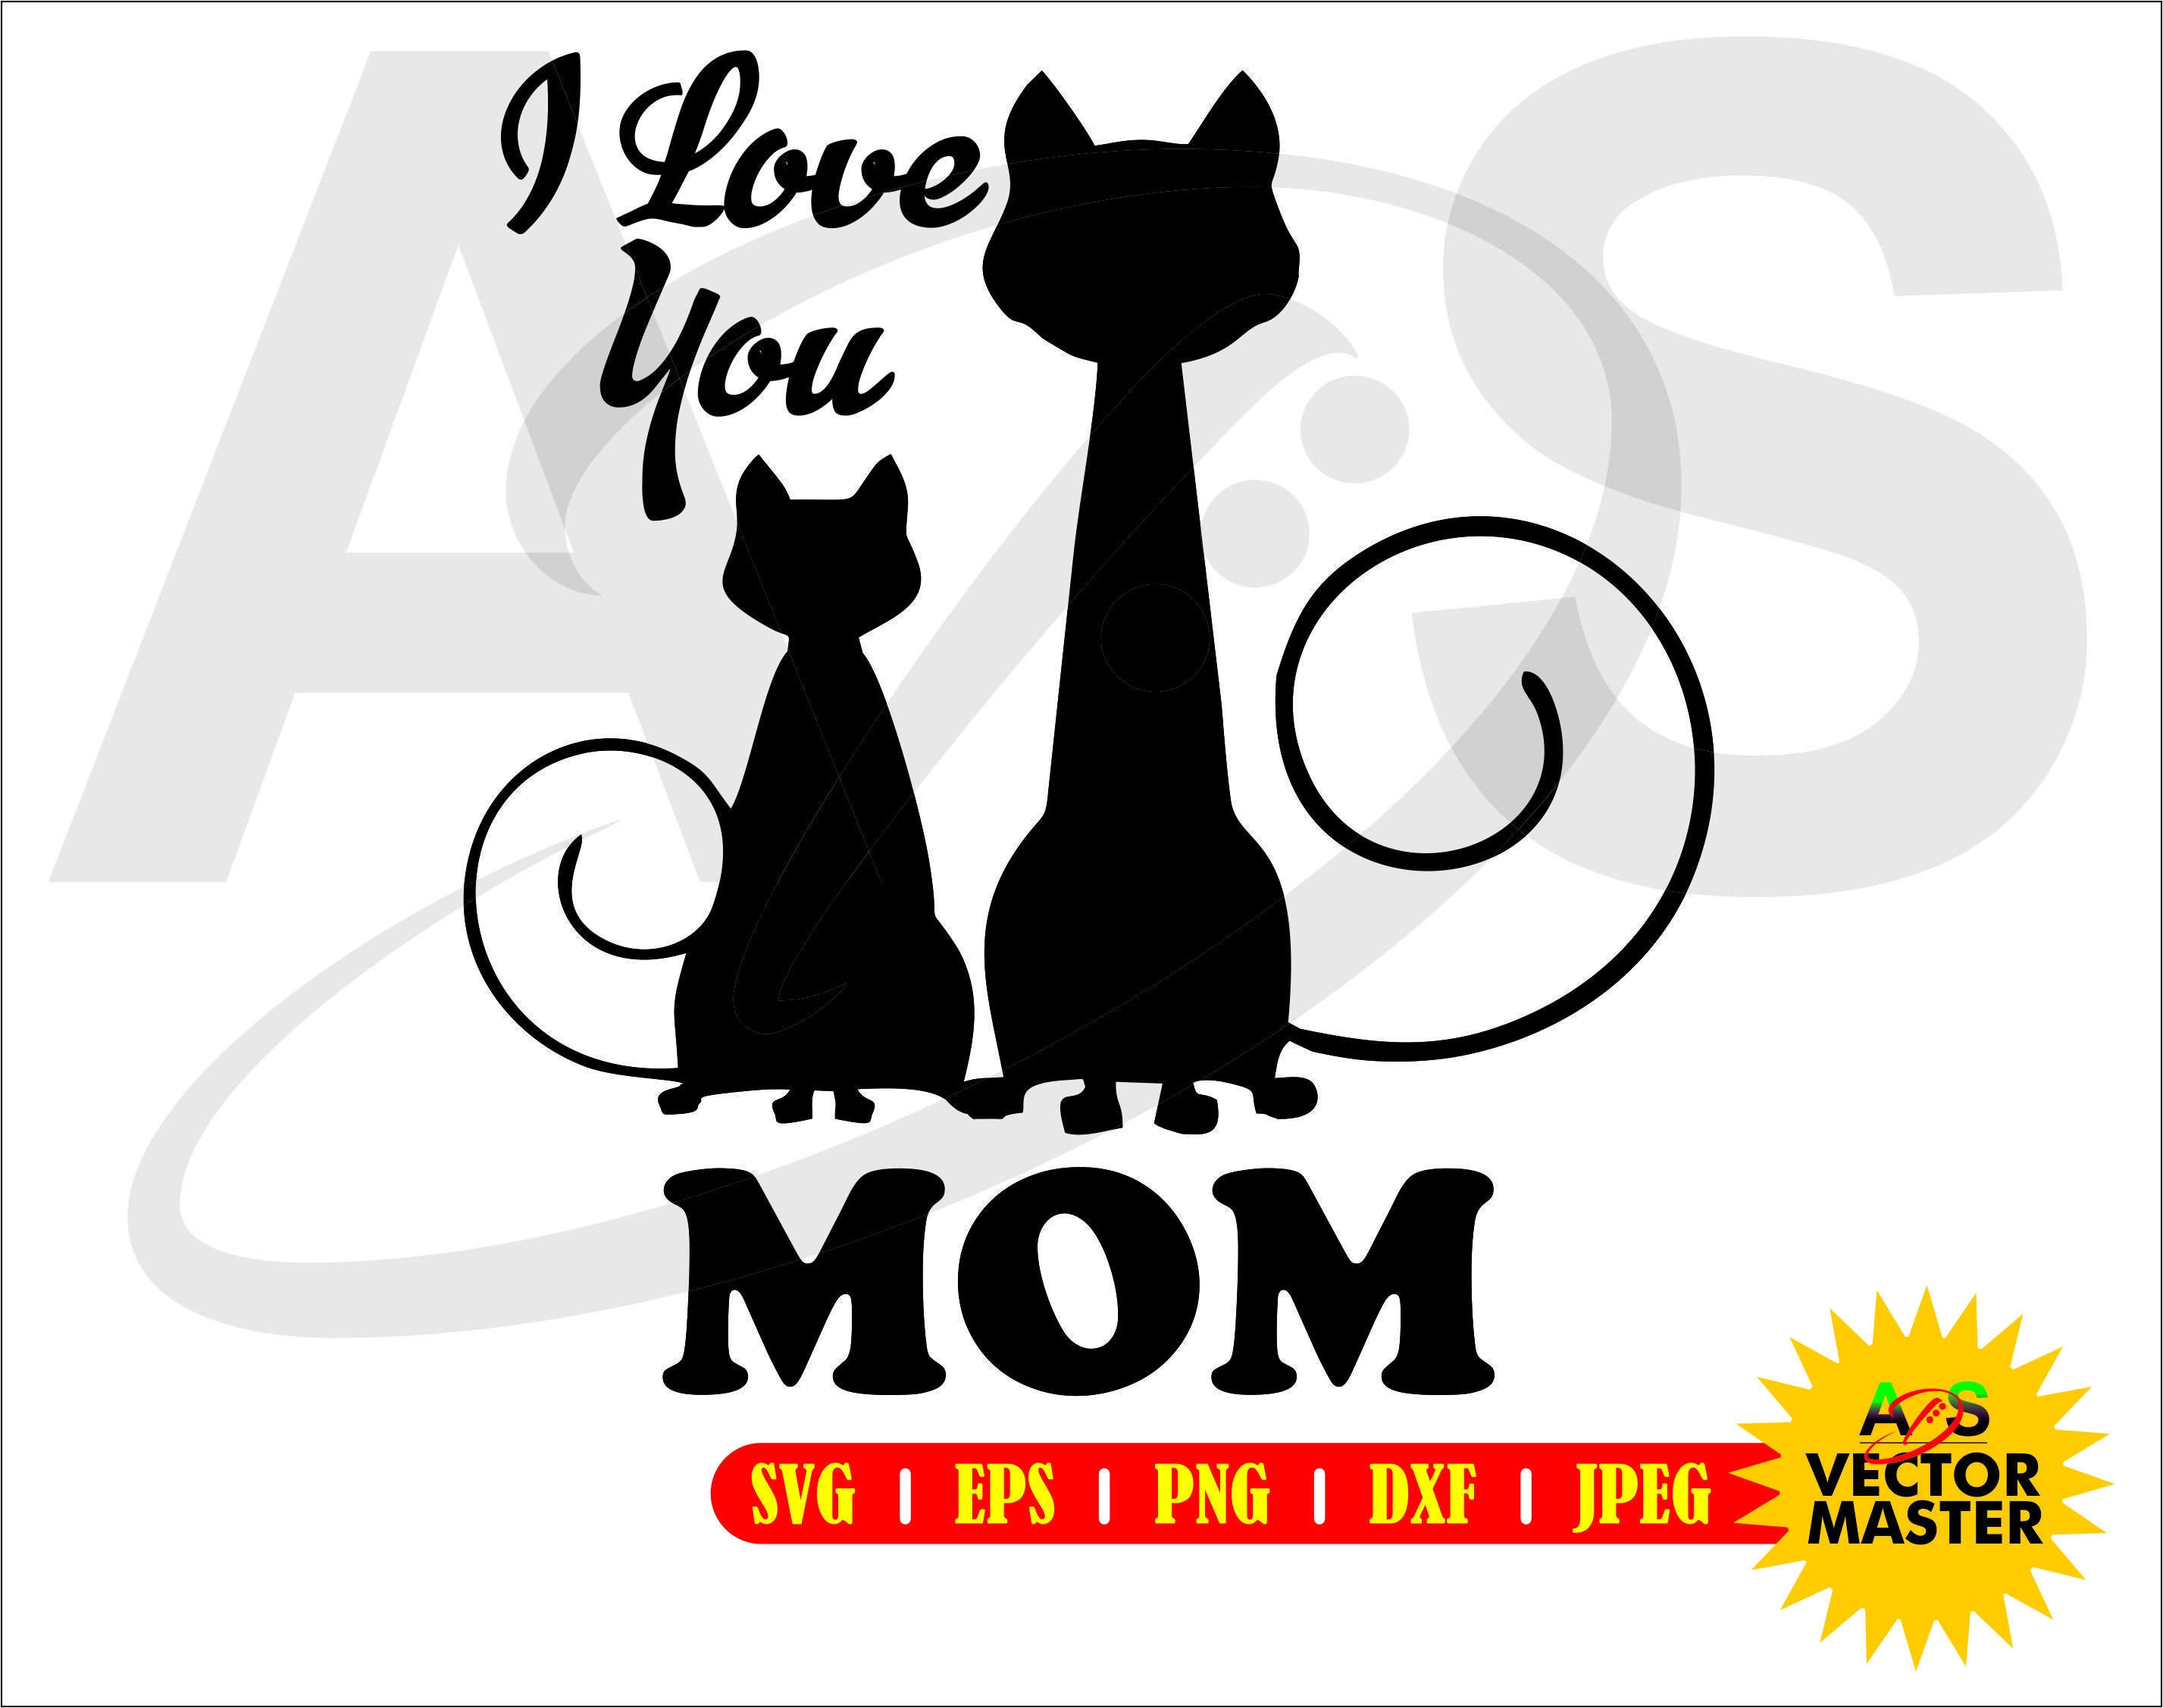 dxf Cricut jpeg vector png Mother Means Love 1 svg eps Silhouette digital file Roland Quality Cutting and/or Print File raster